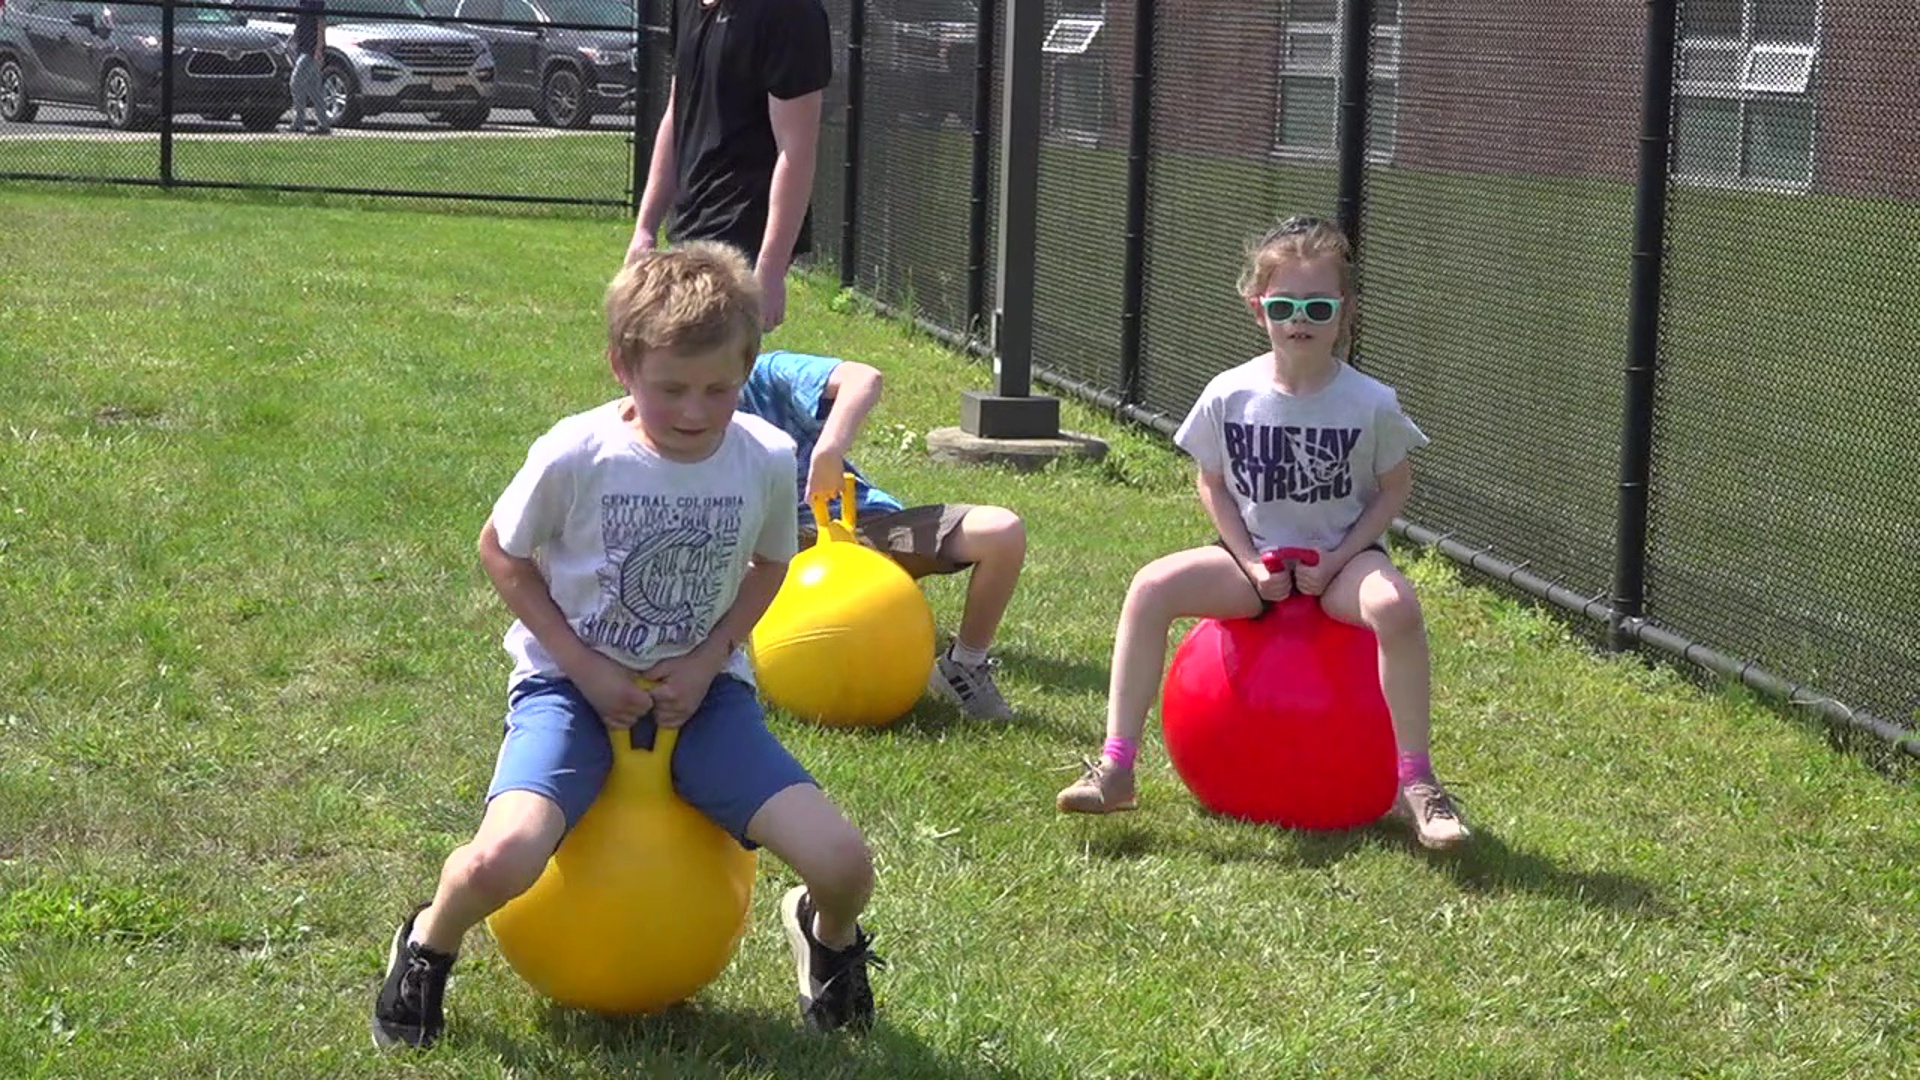 Students from eight different school districts gathered in Berwick for an adapted field day.